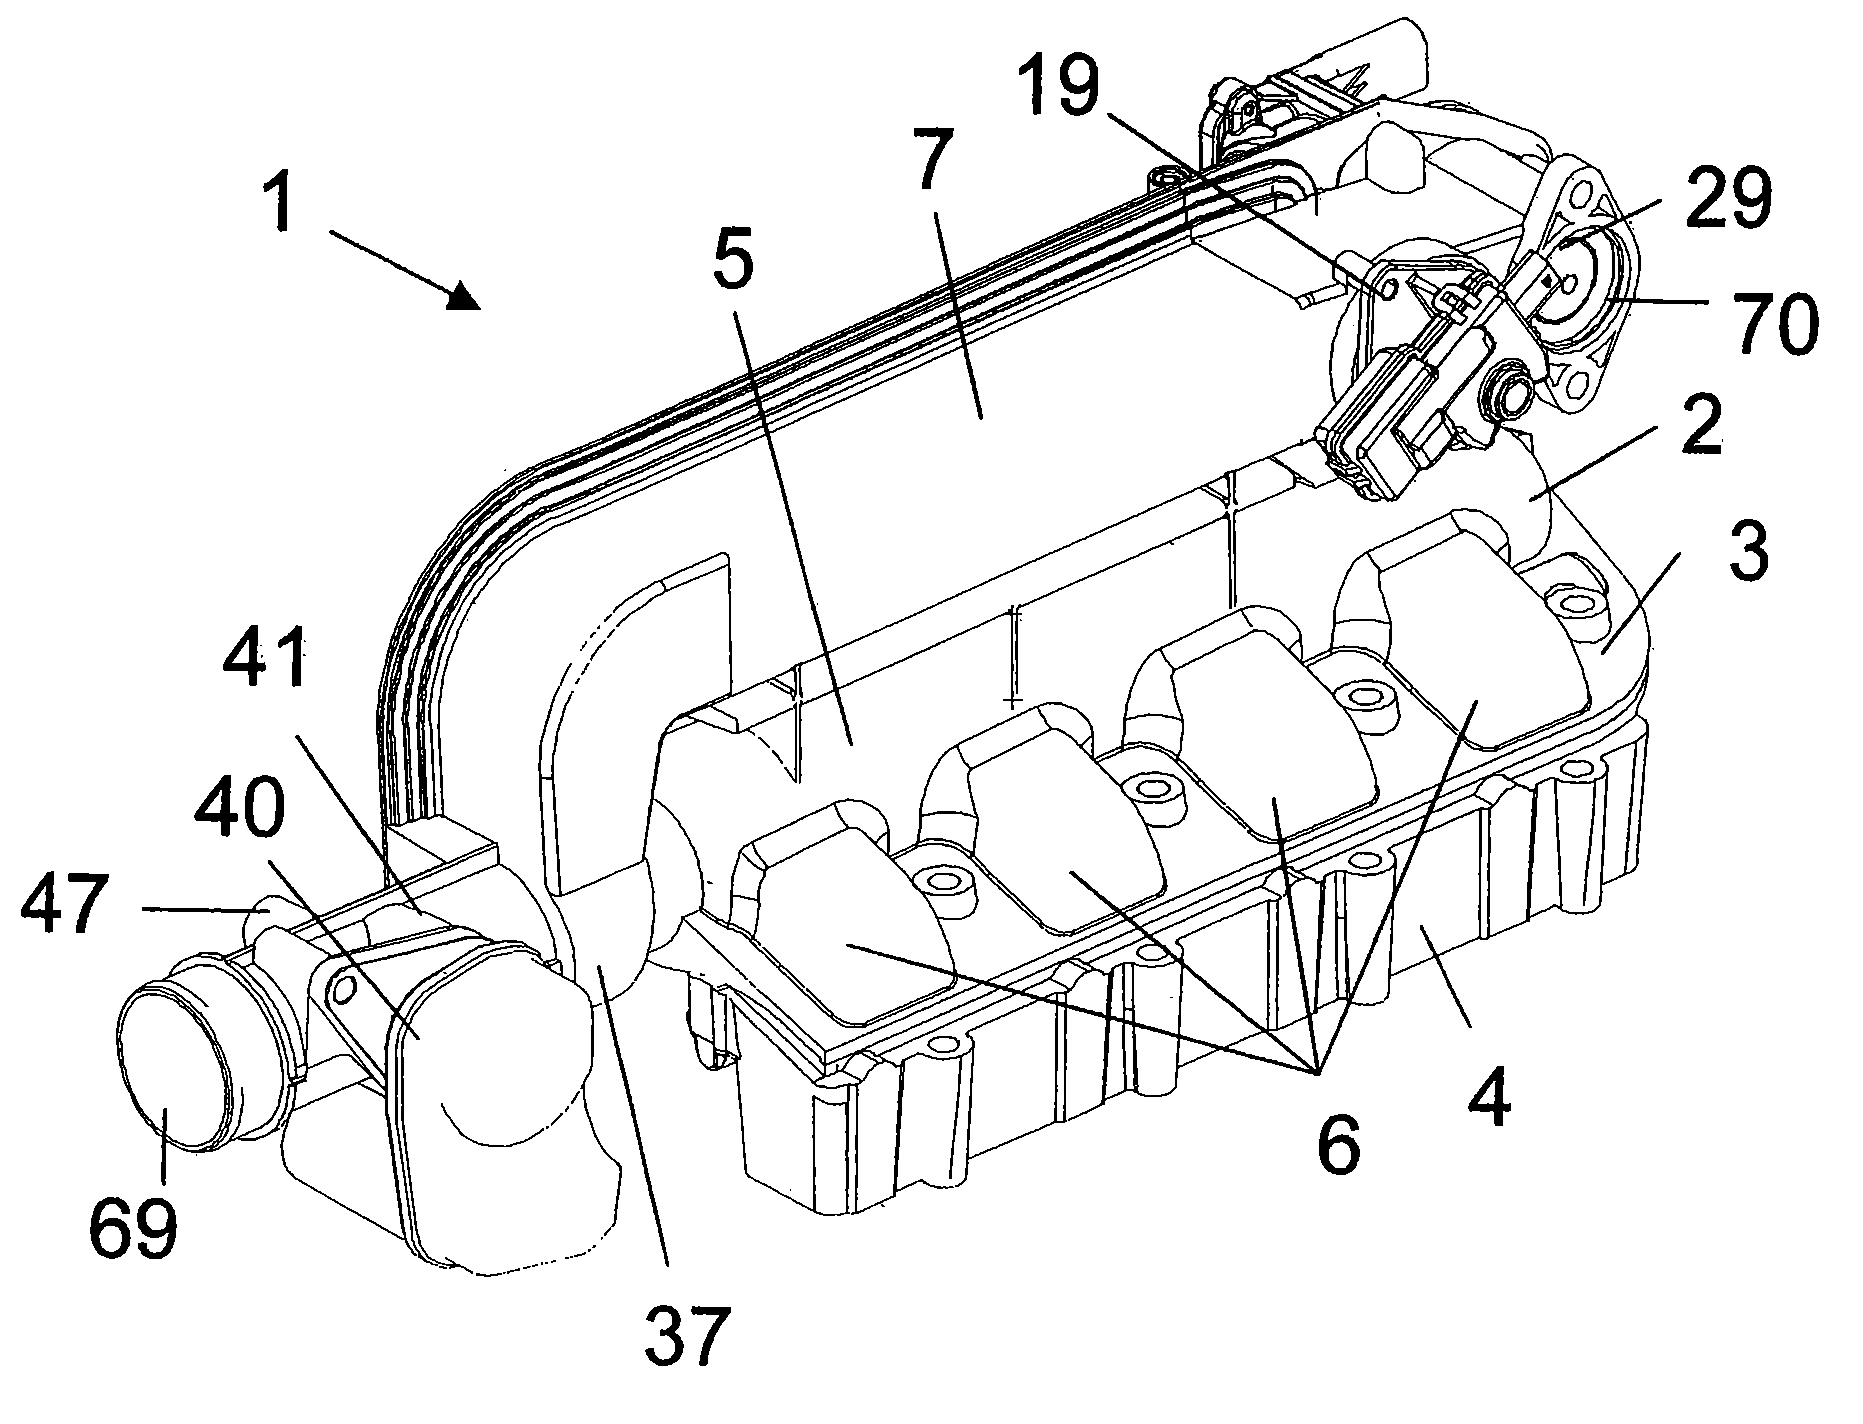 Air-intake duct system for a combustion engine